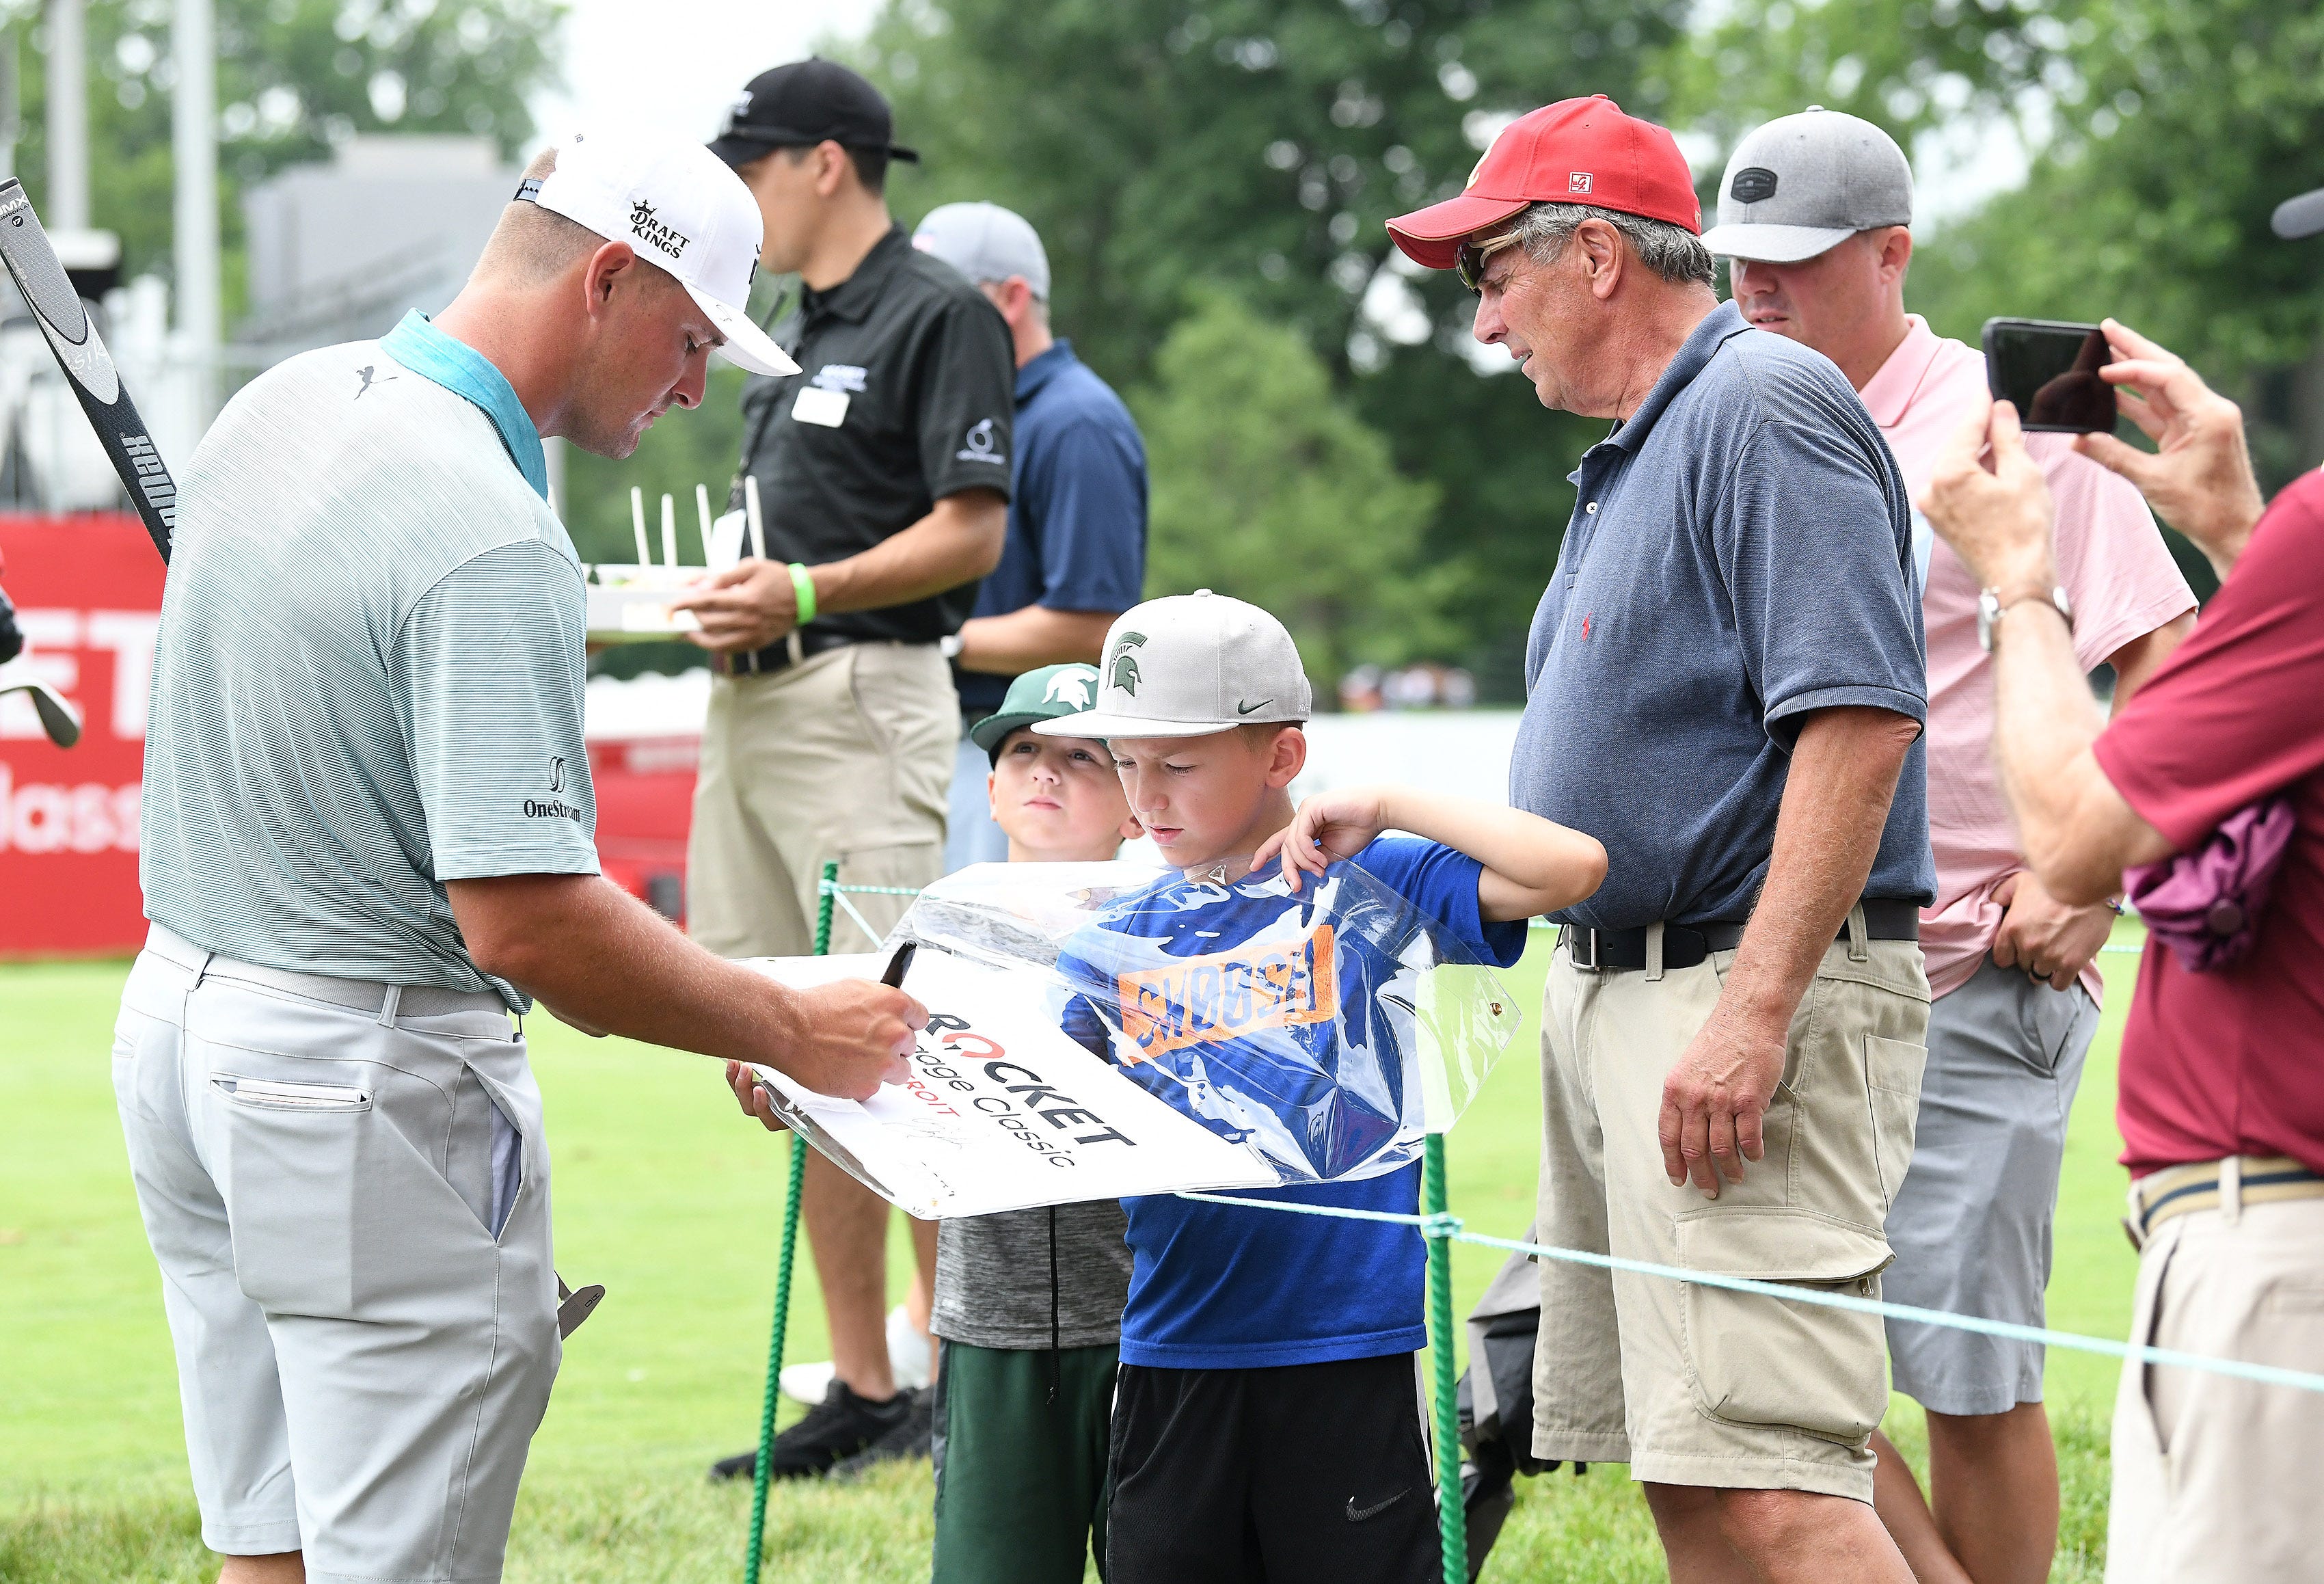 From left, Bryson DeChambeau stops to sign autographs for brothers Grady Goergen, 7, and Jacob Goergen, 10, with grandpa Don Goergen and dad Tim Goergen of Rochester at the 15th tee.